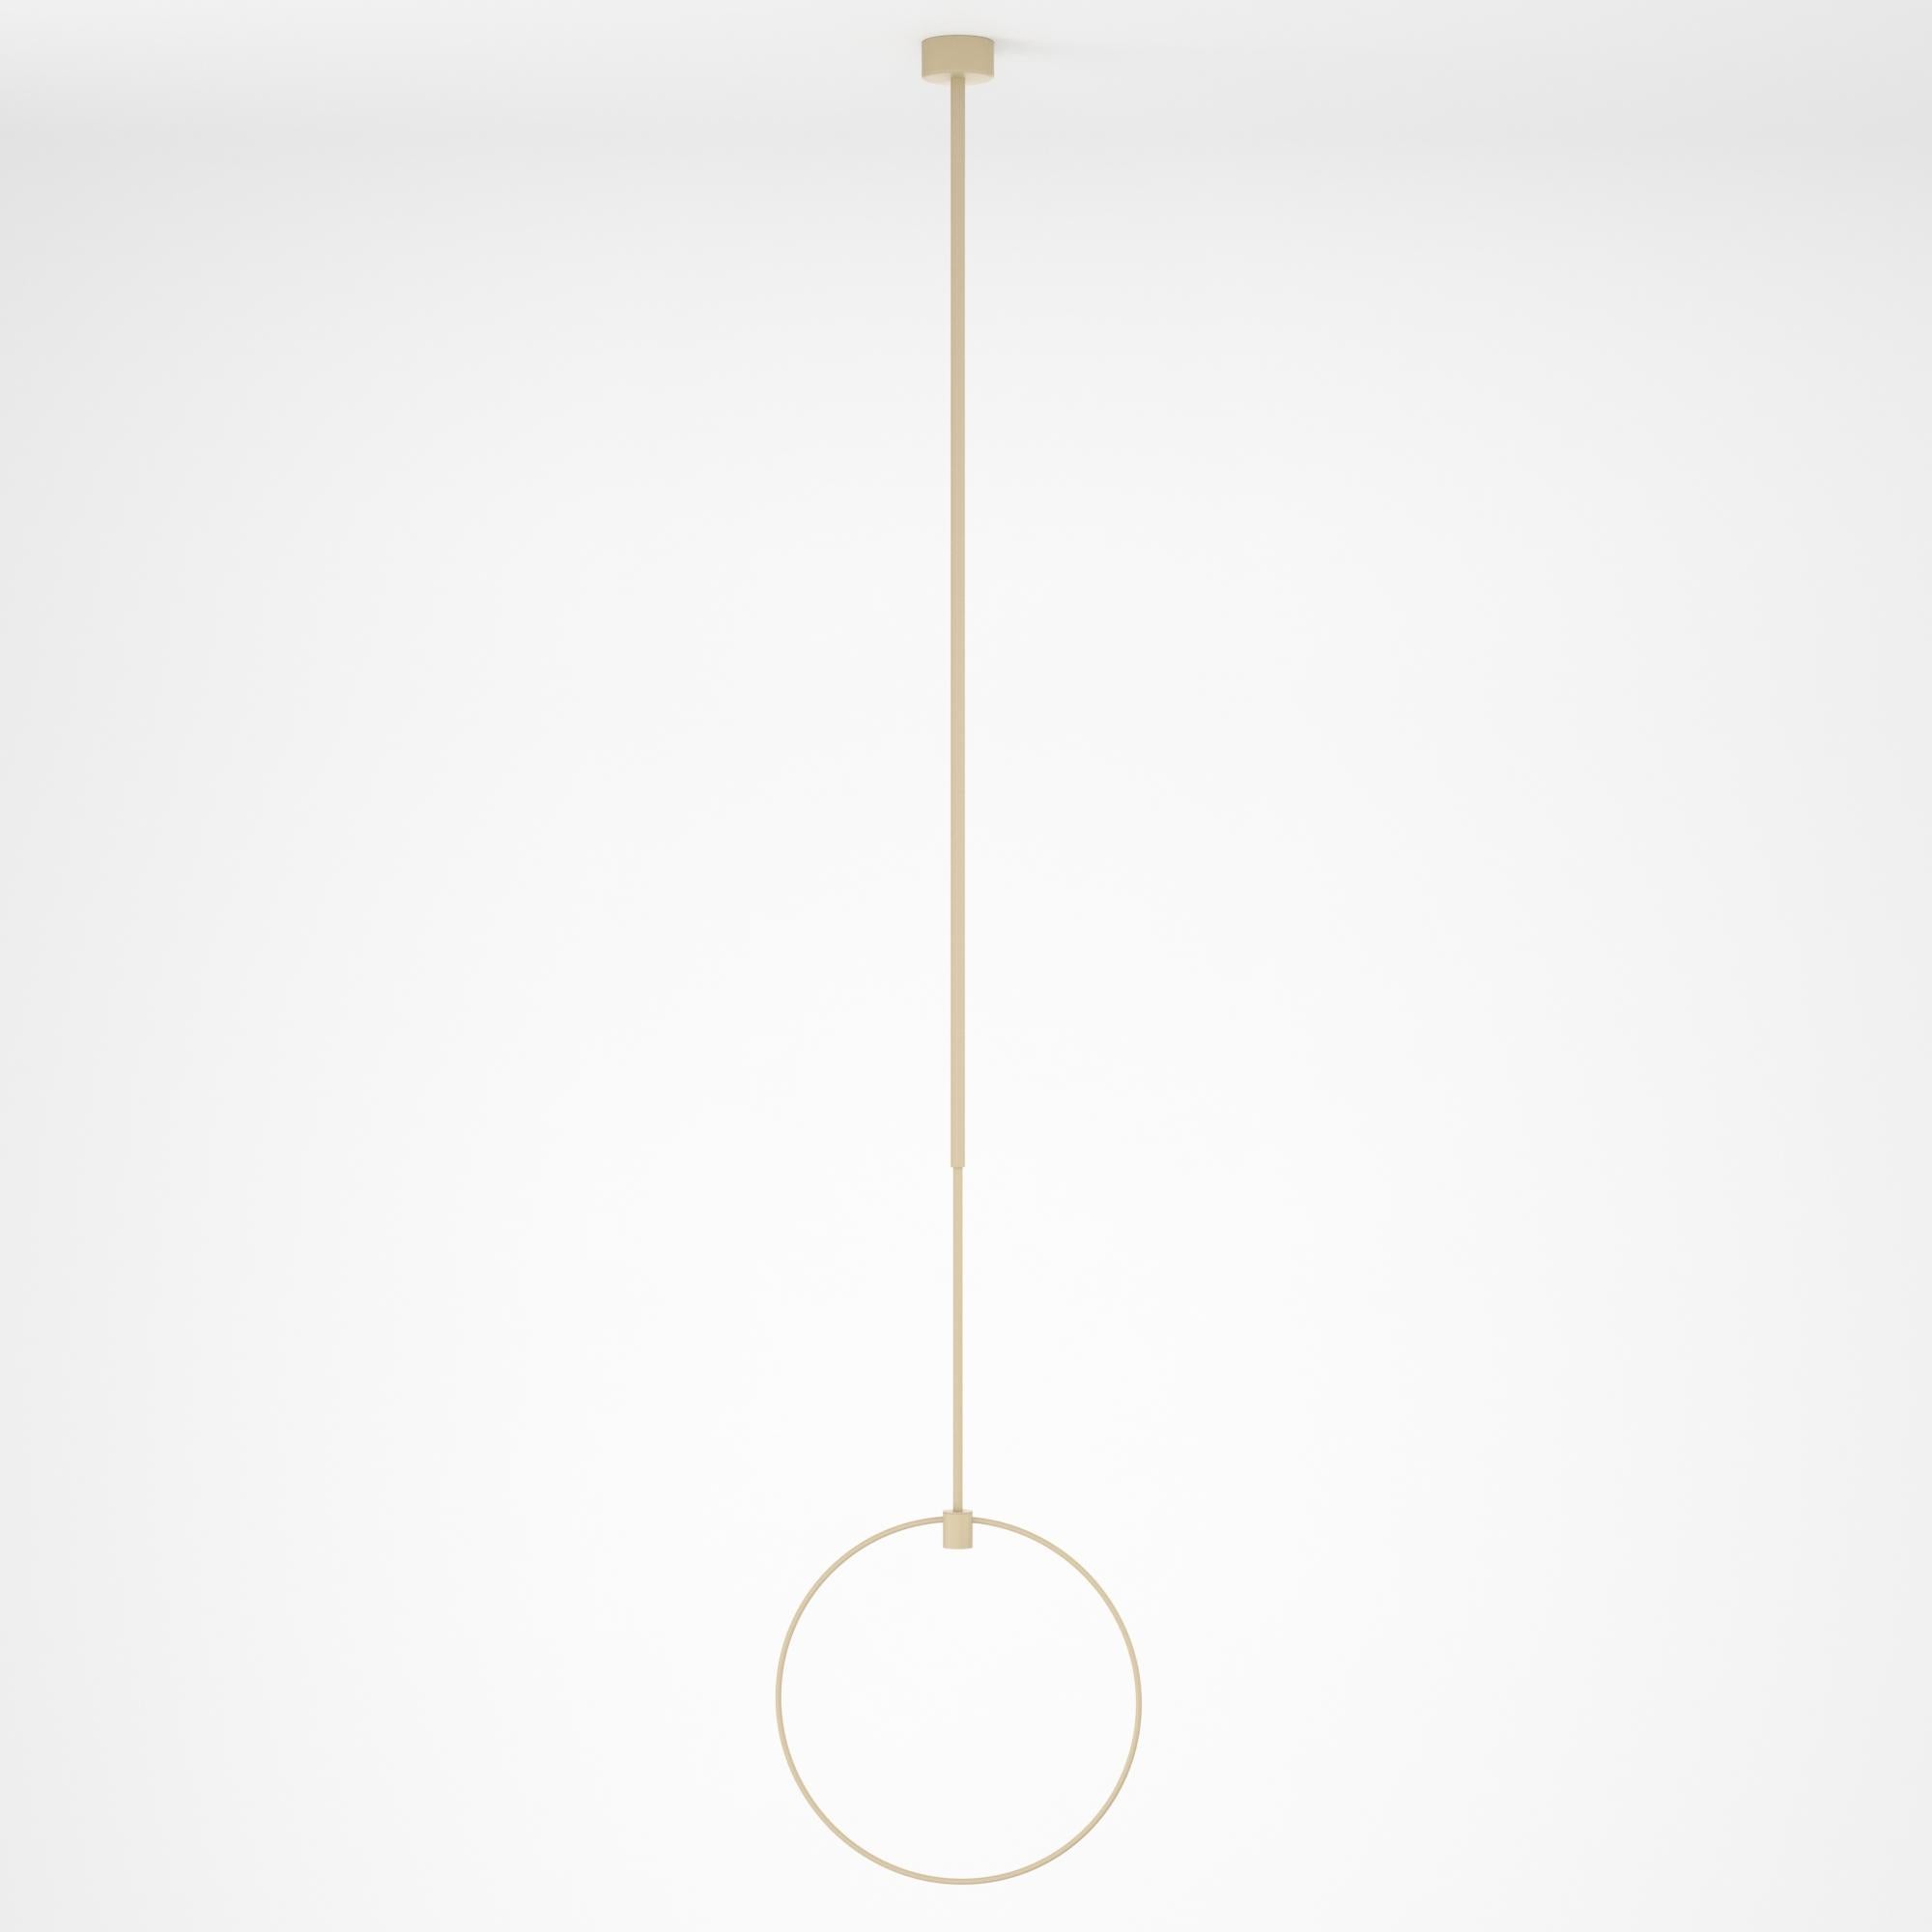 Minimalistic Chandelier Lamp, Modern Stainless Steel Lighting In New Condition For Sale In Vilnius, LT